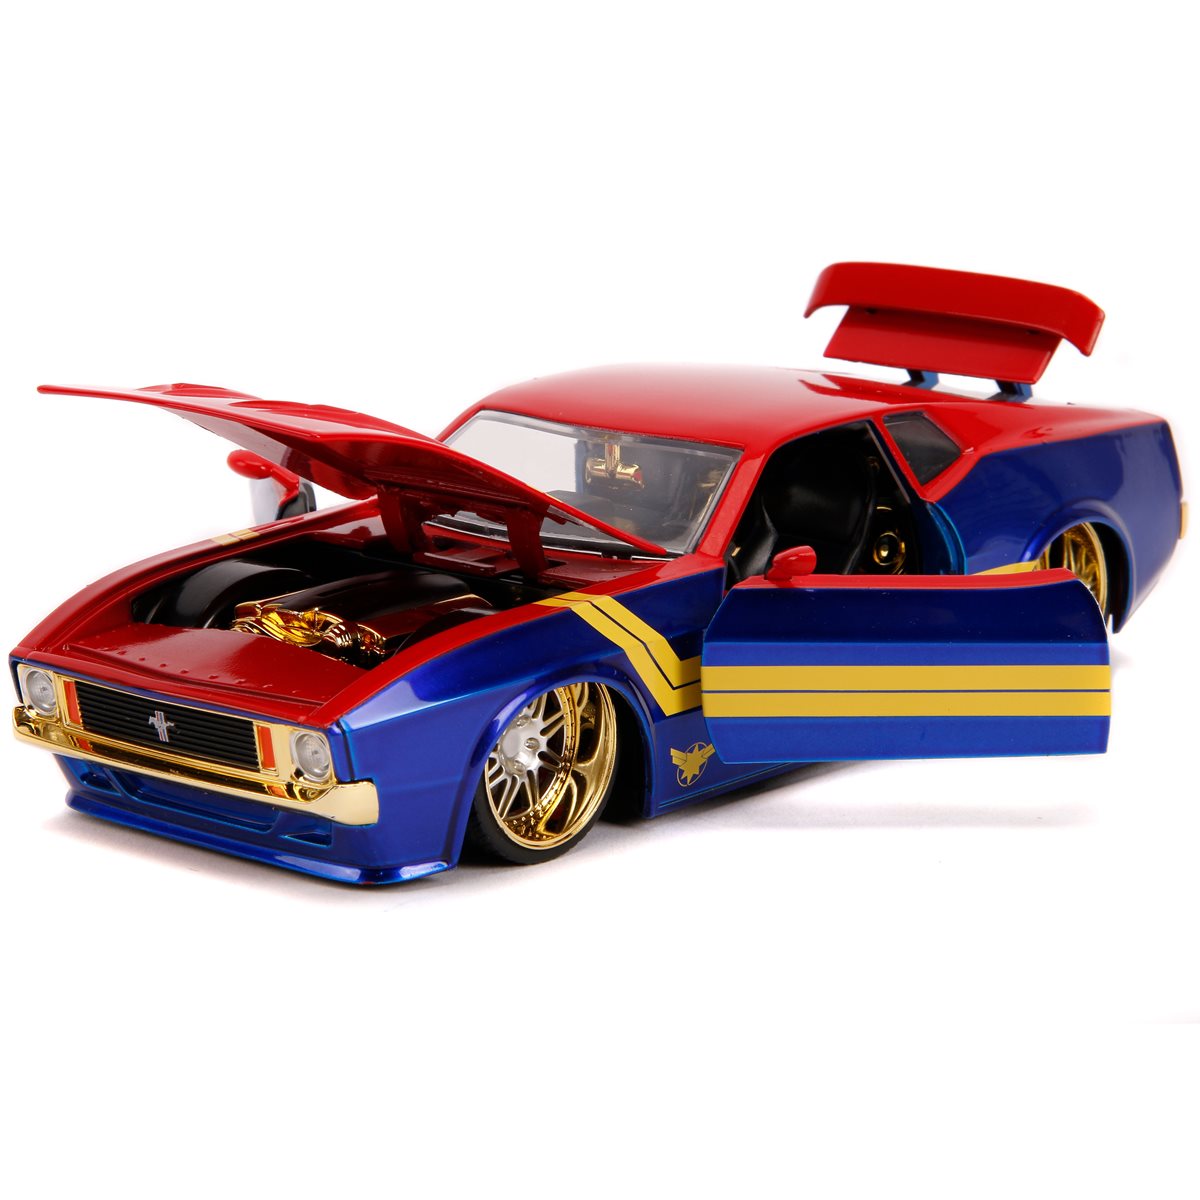 *Dent/Ding Packaging* -  Captain Marvel 1973 Ford Mustang Mach 1 Avengers 1:24 Scale Die-Cast Metal Vehicle with Figure